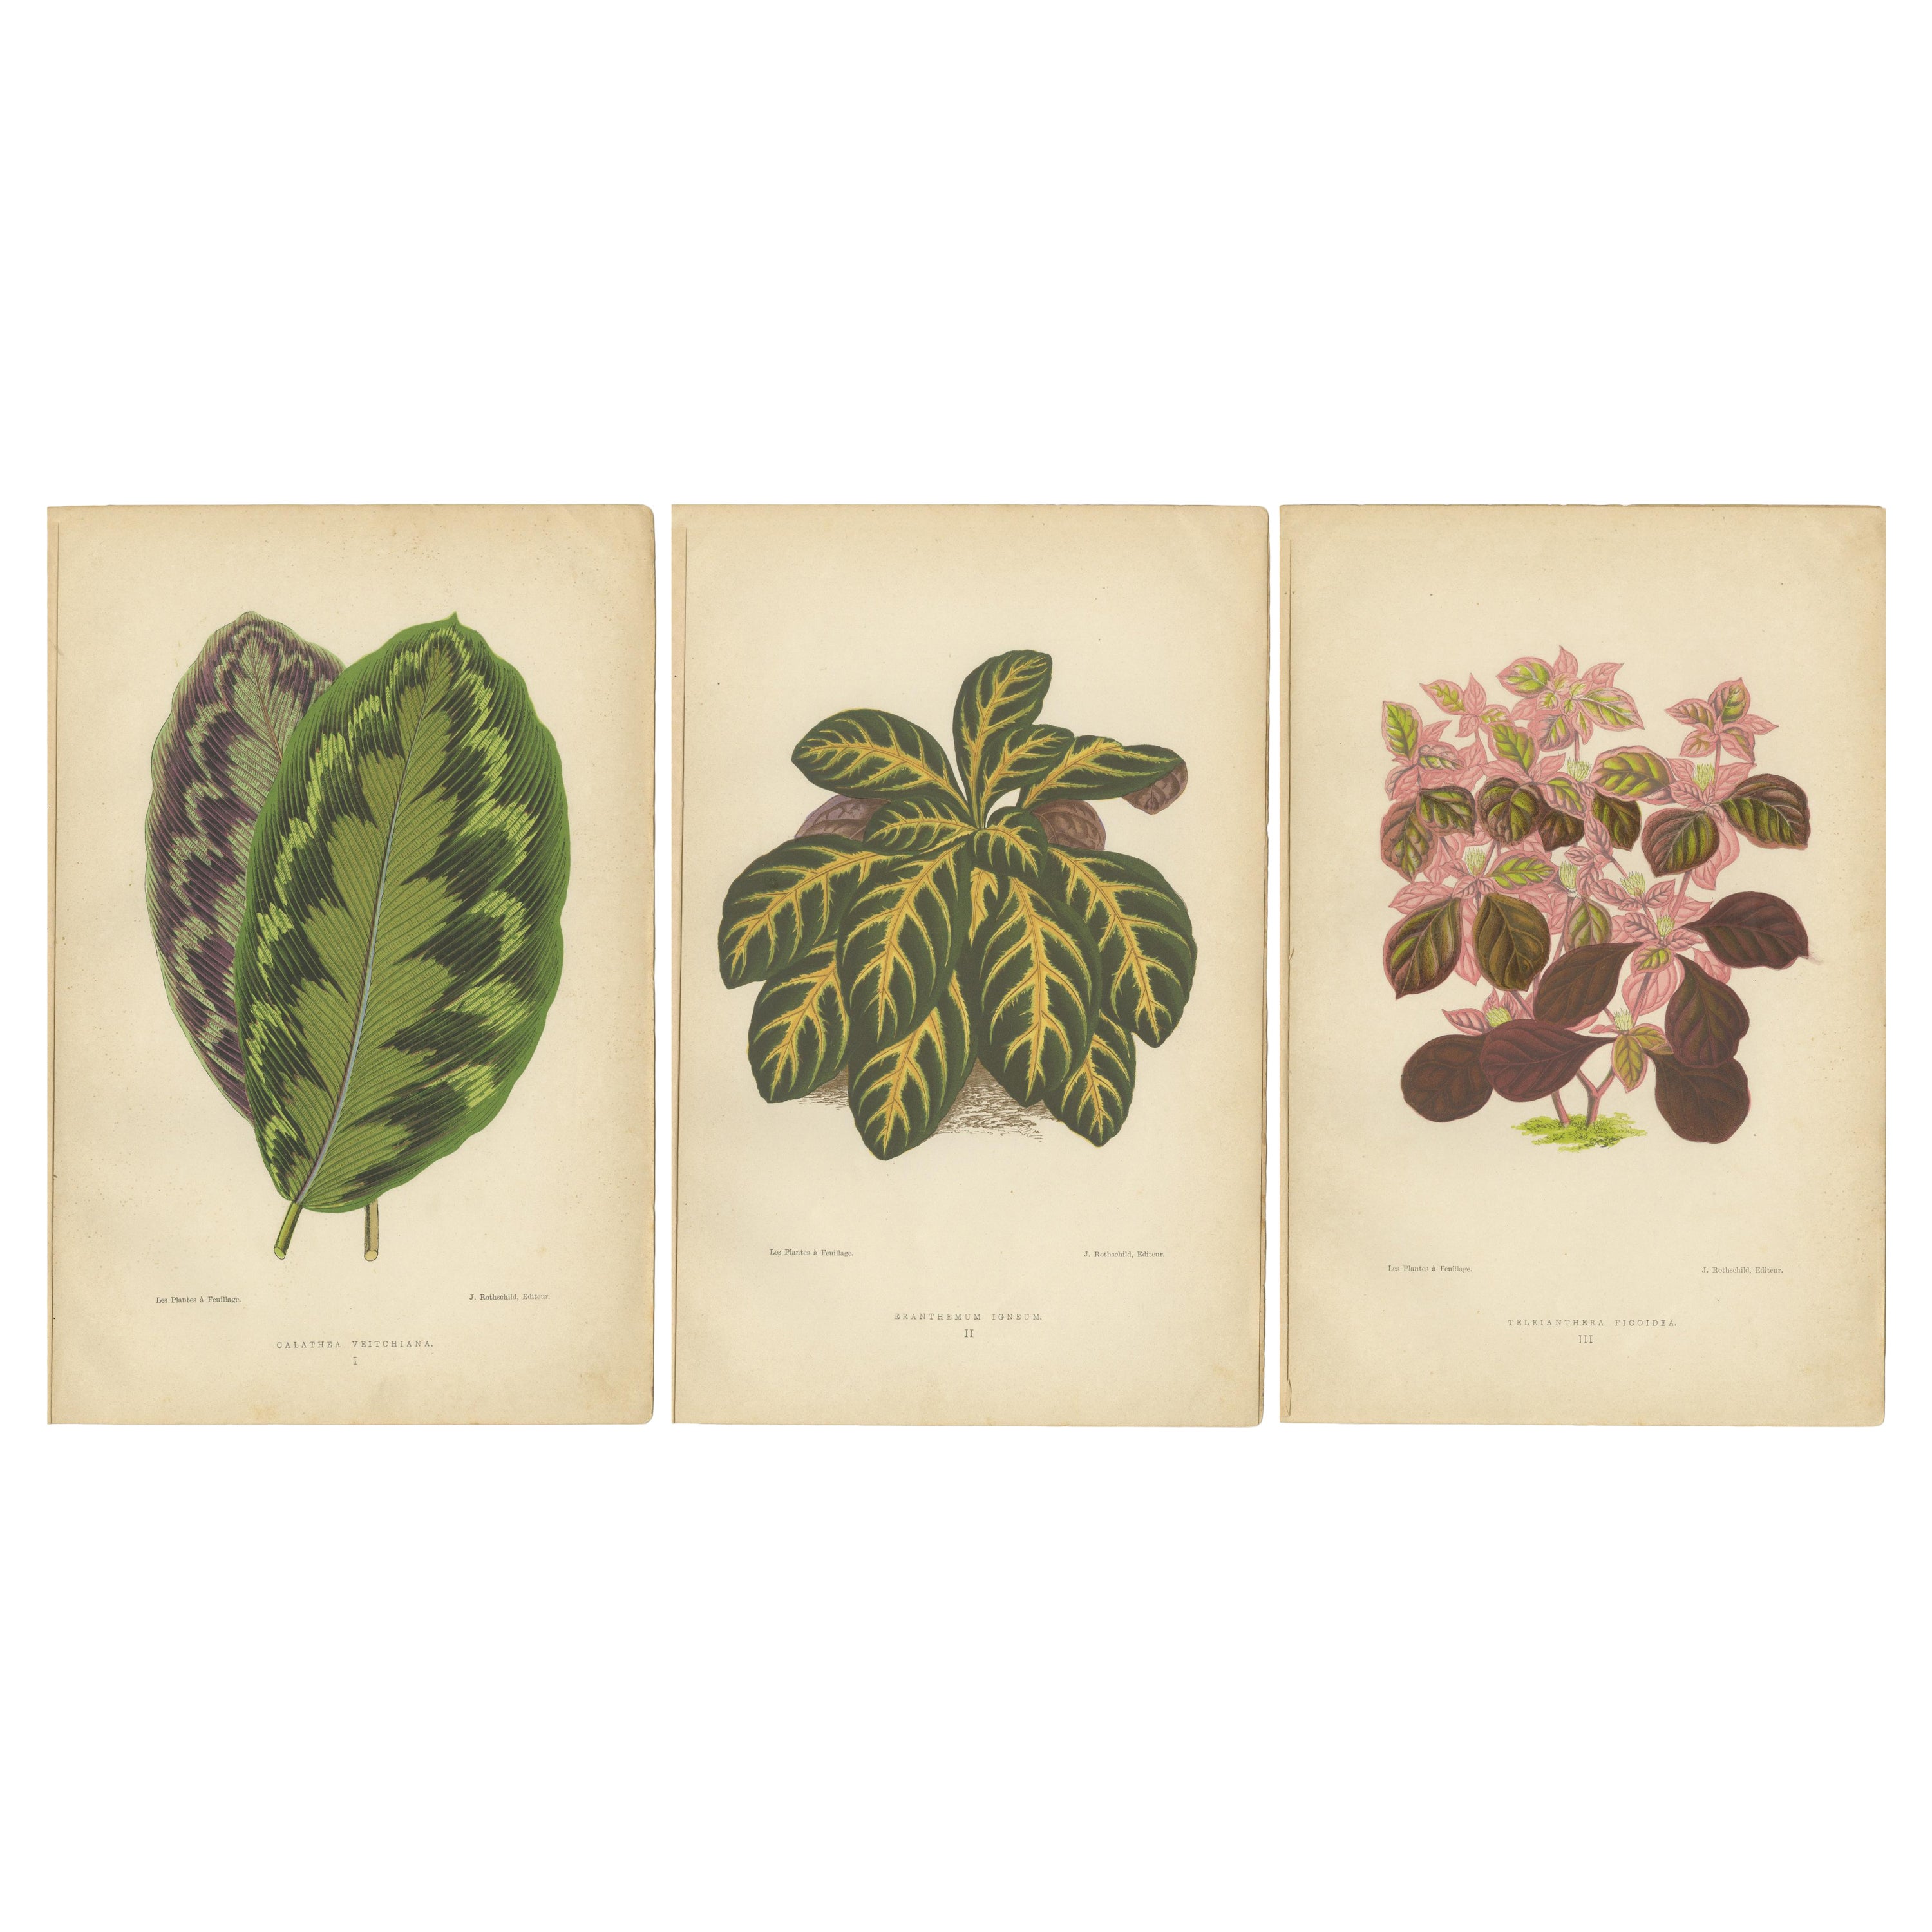 Vibrant Botanicals: A Study of Leaf Patterns and Colors, Published in 1880